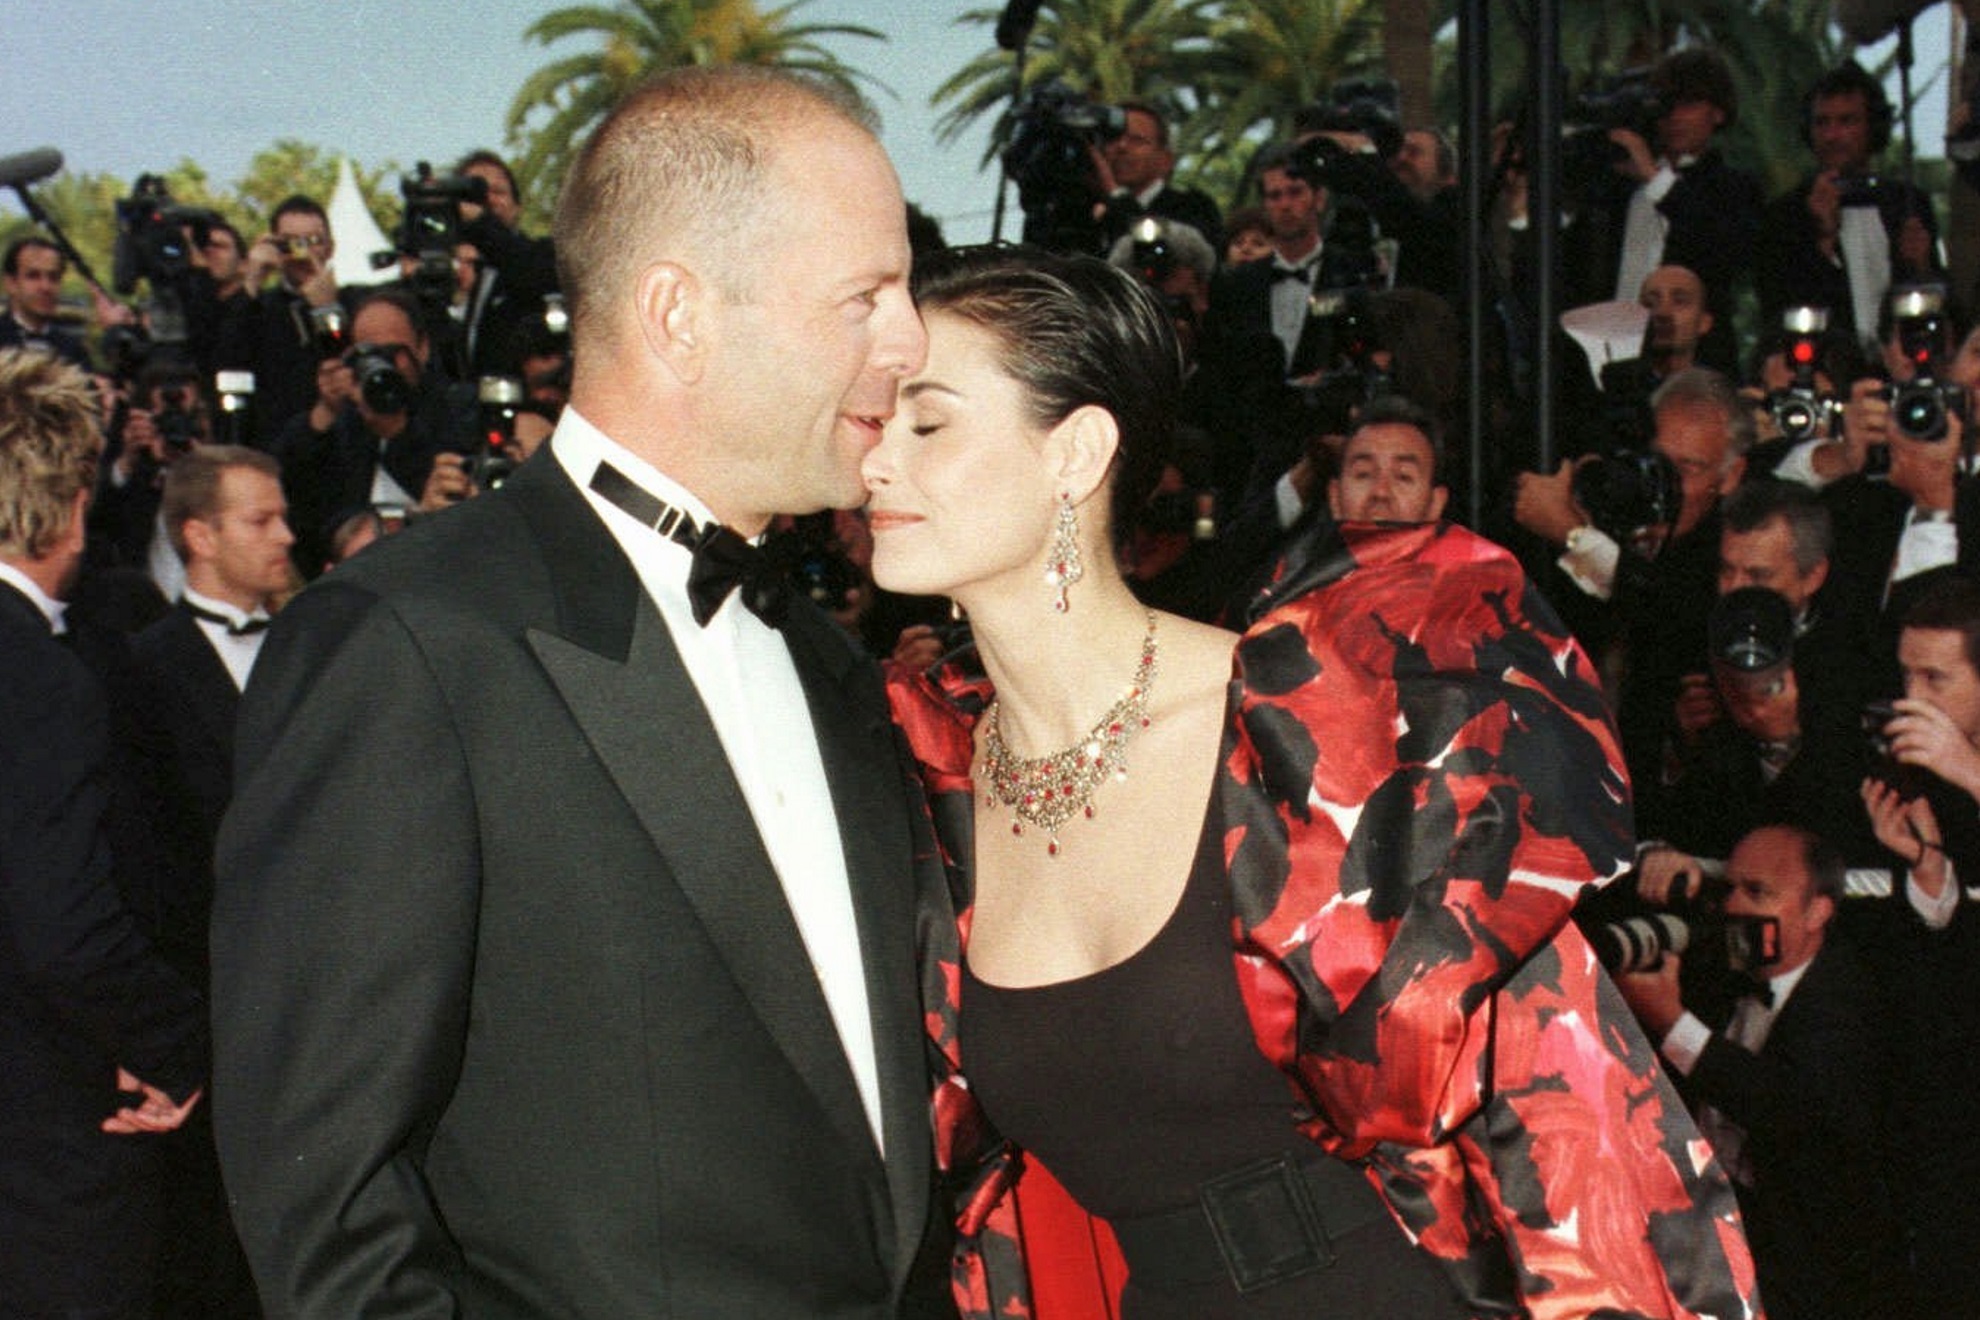 Bruce Willis Demi Moore demencia frontotemporal ex mujer cine Cannes